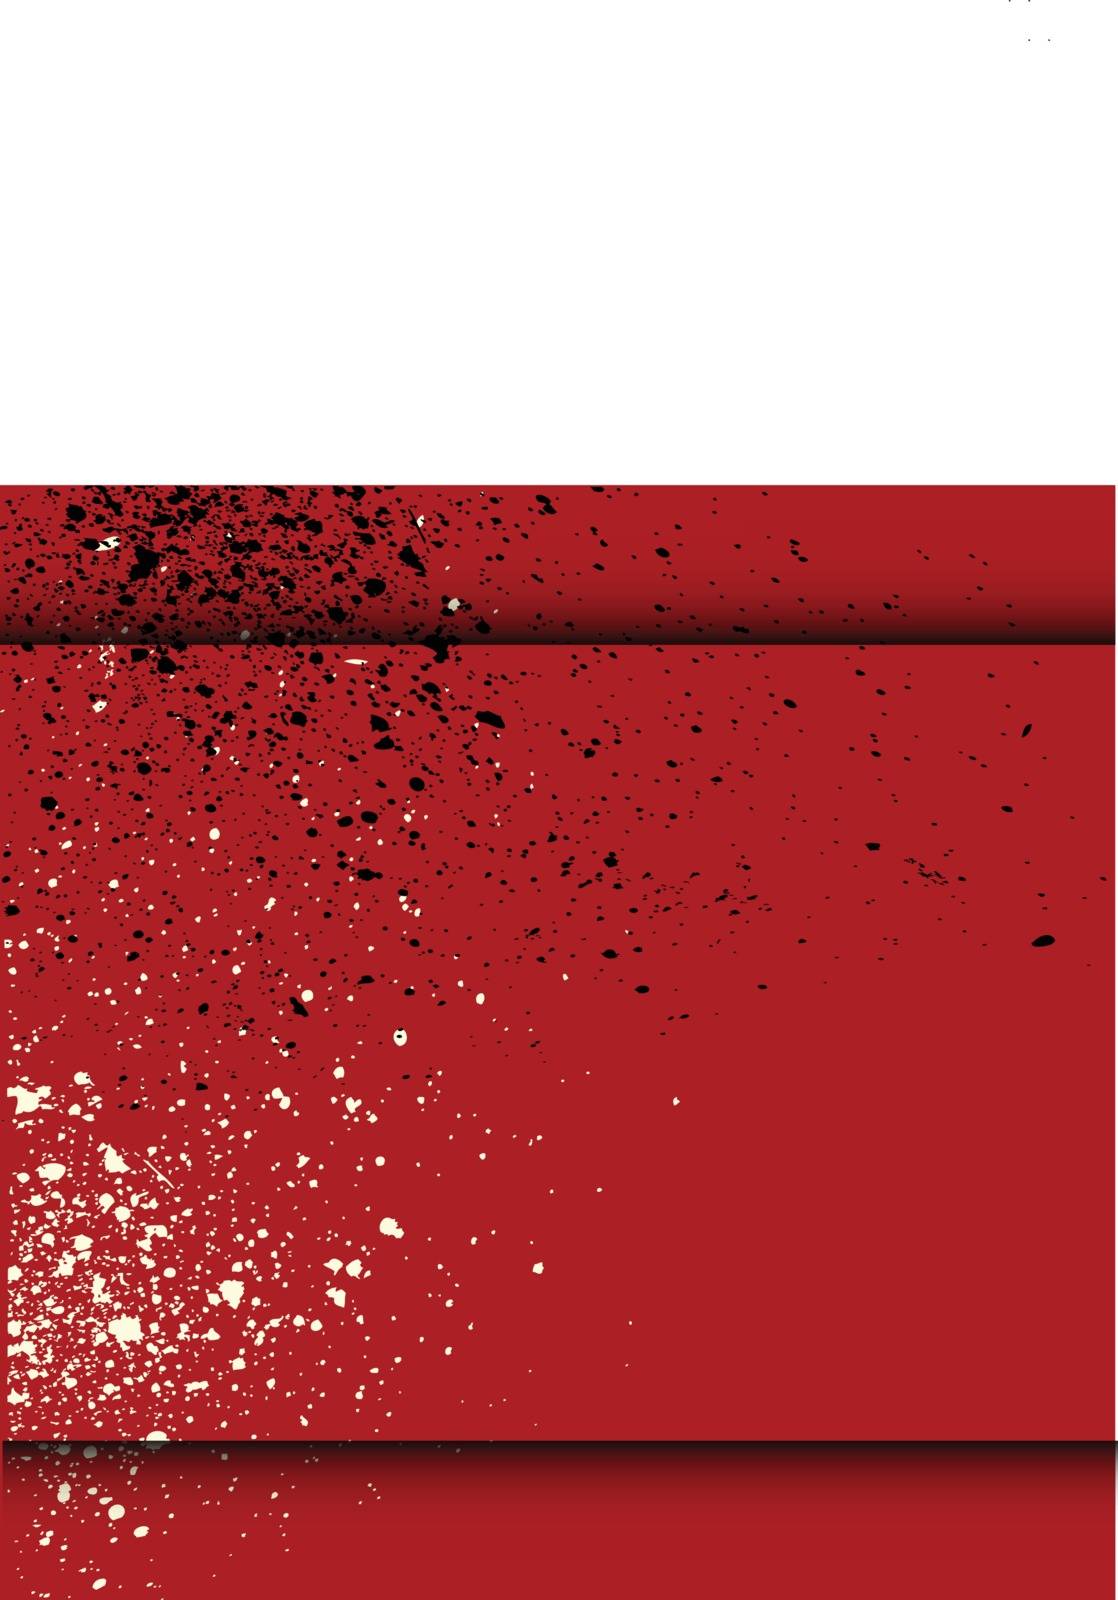 Red blood splatter background with dribble effect by Graffiti21